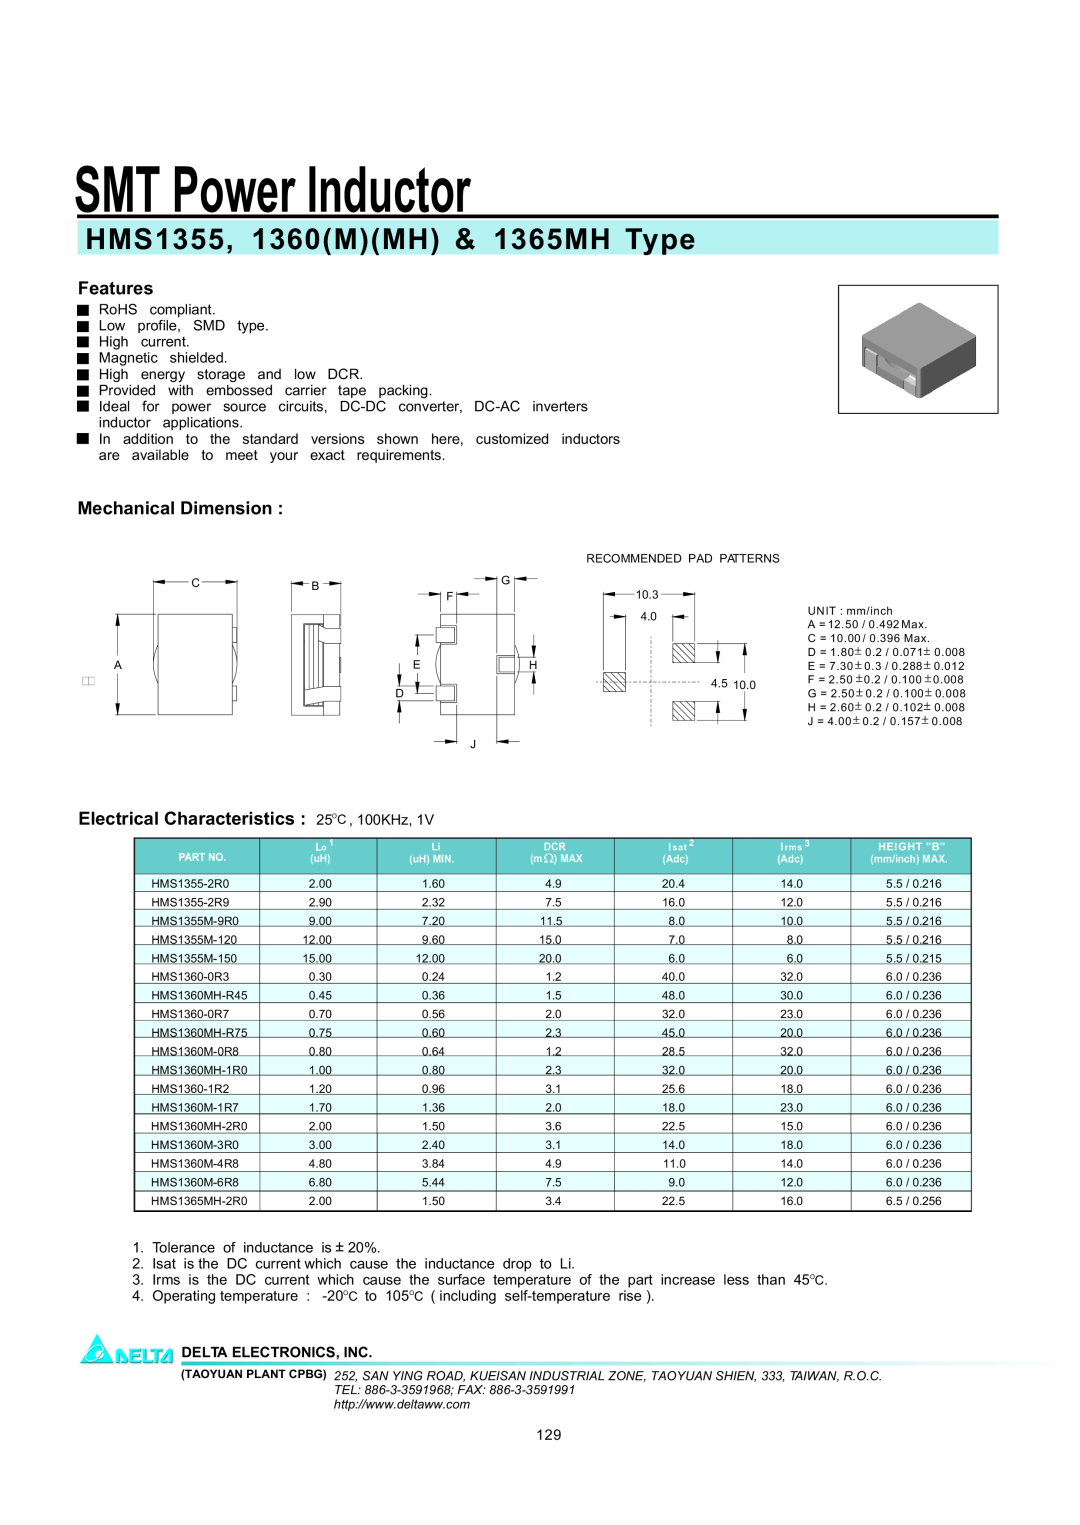 Delta Electronics HMS1365MH manual SMT Power Inductor, HMS1355, 1360MMH & 1365MH Type, Features, Mechanical Dimension 